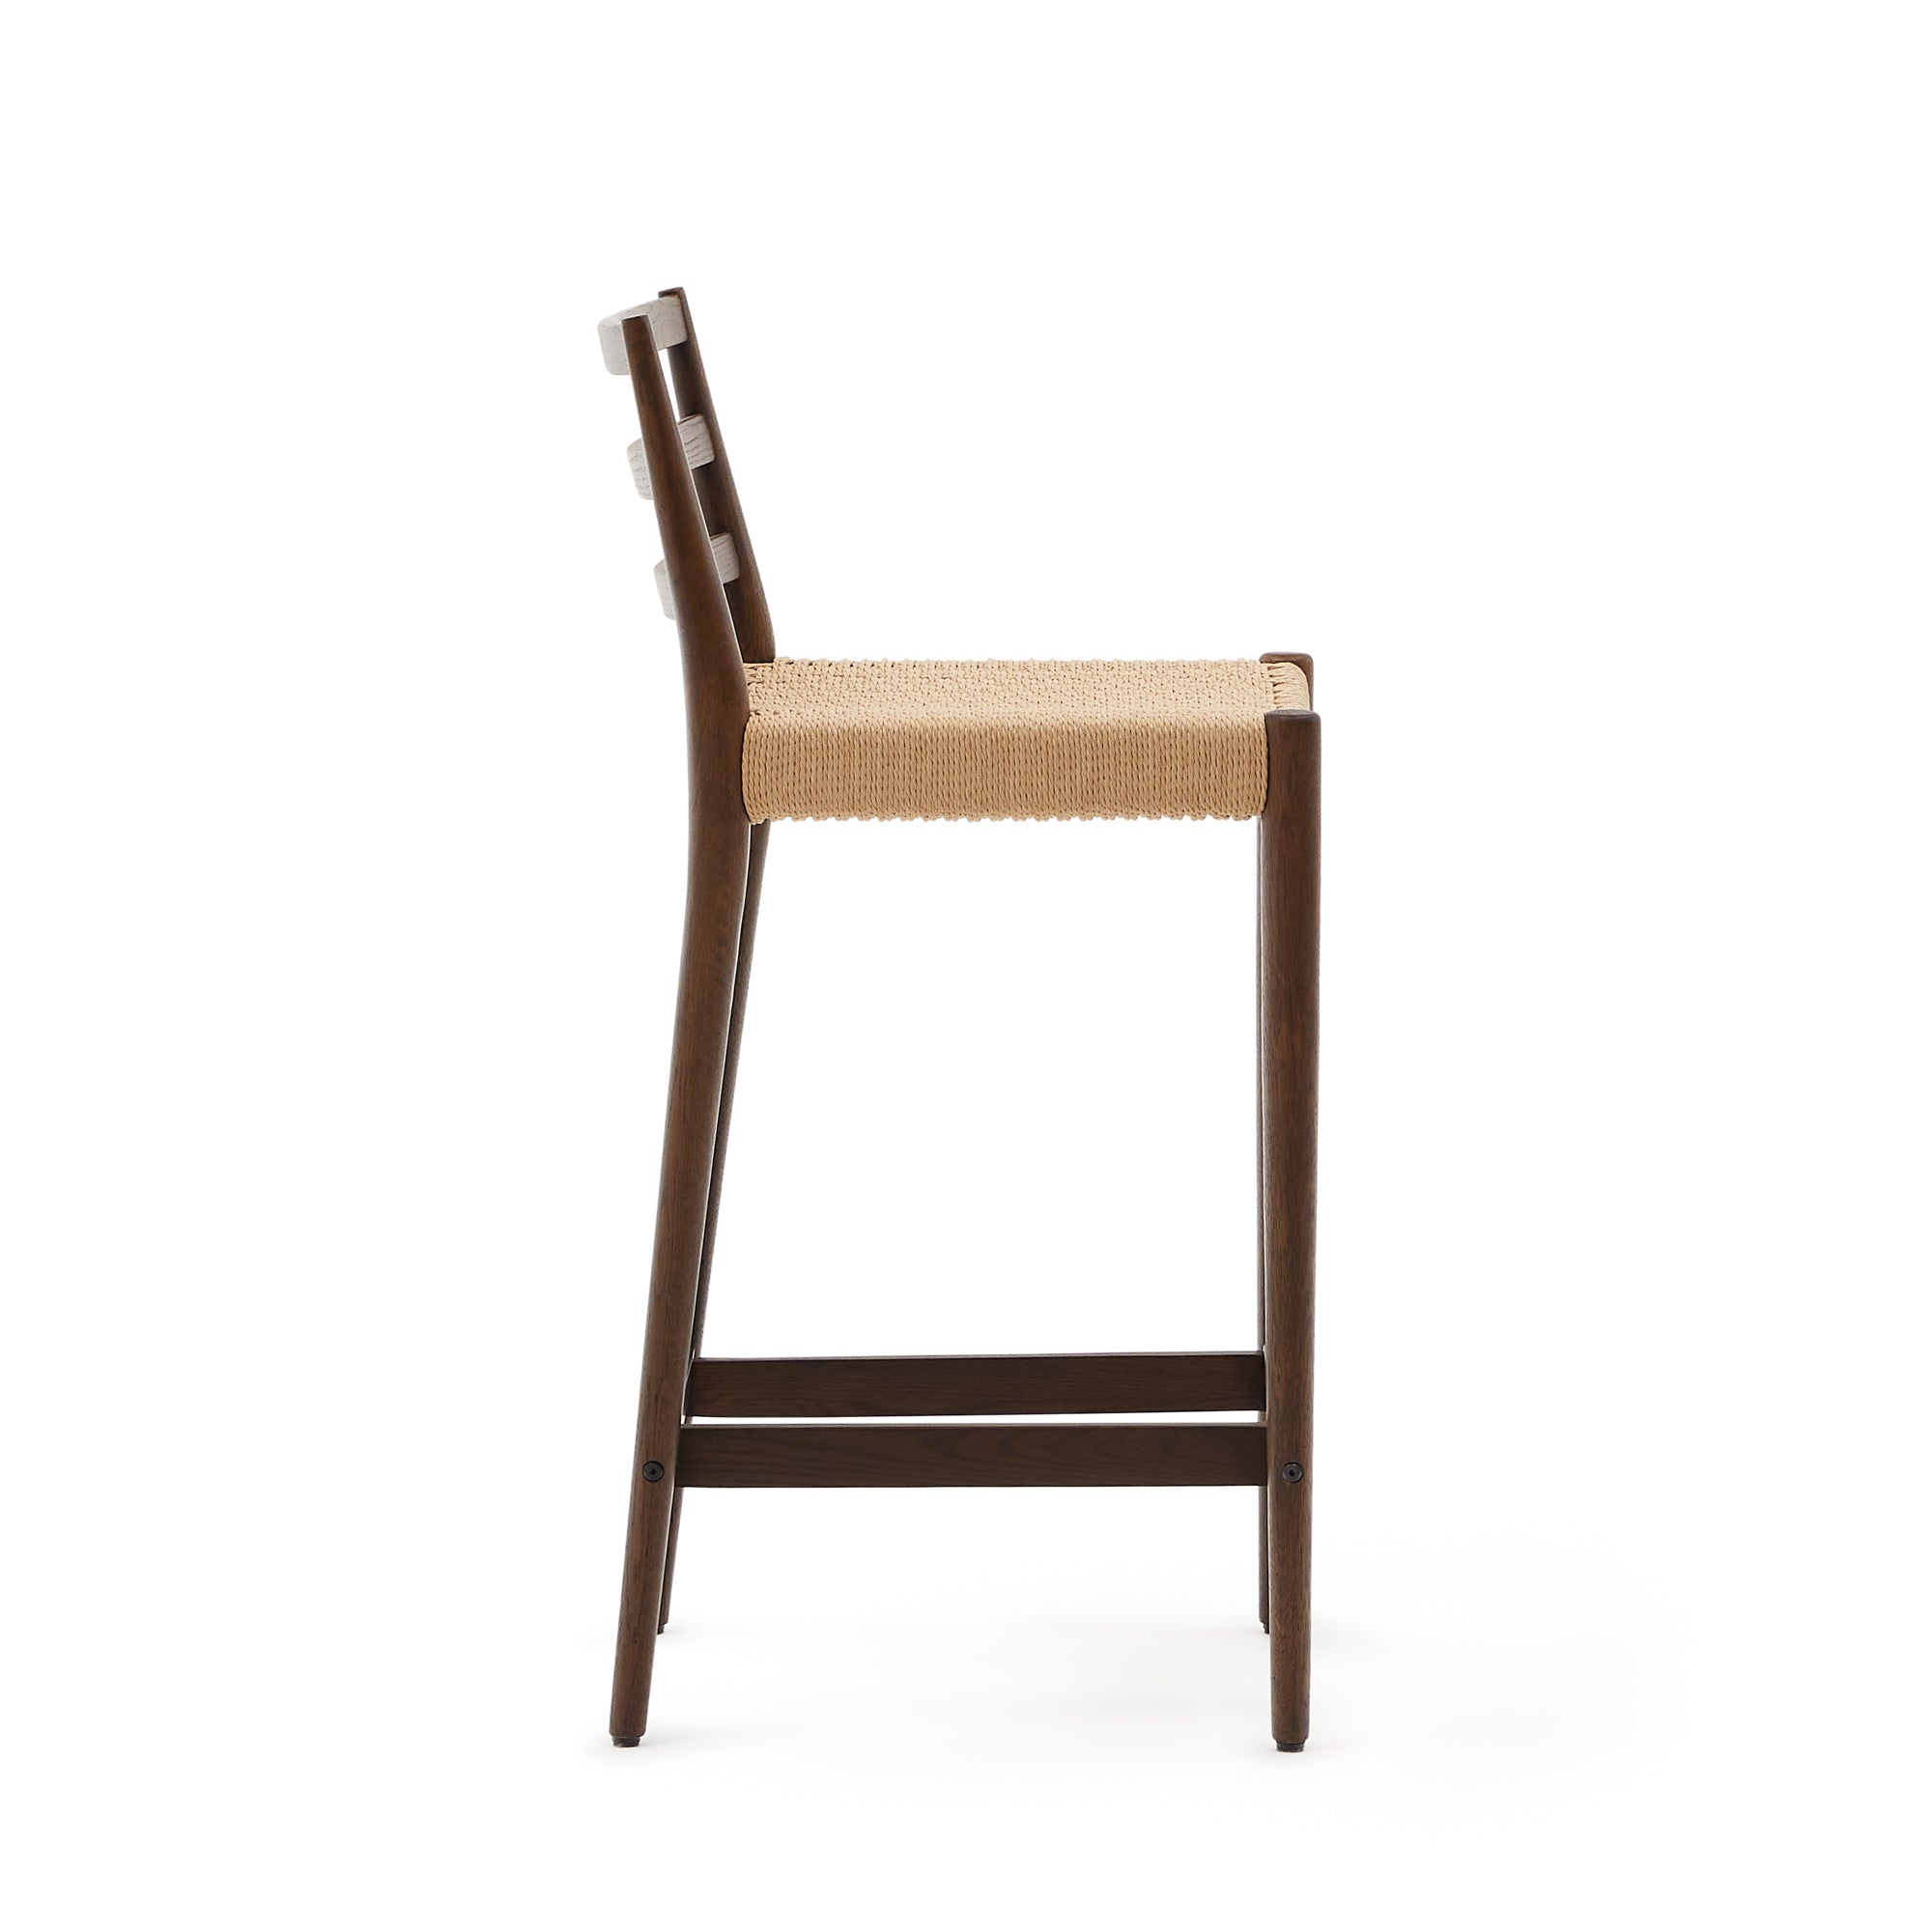 Analy chair with back, solid oak with walnut finish and rope seat, 70 cm 100% FSC